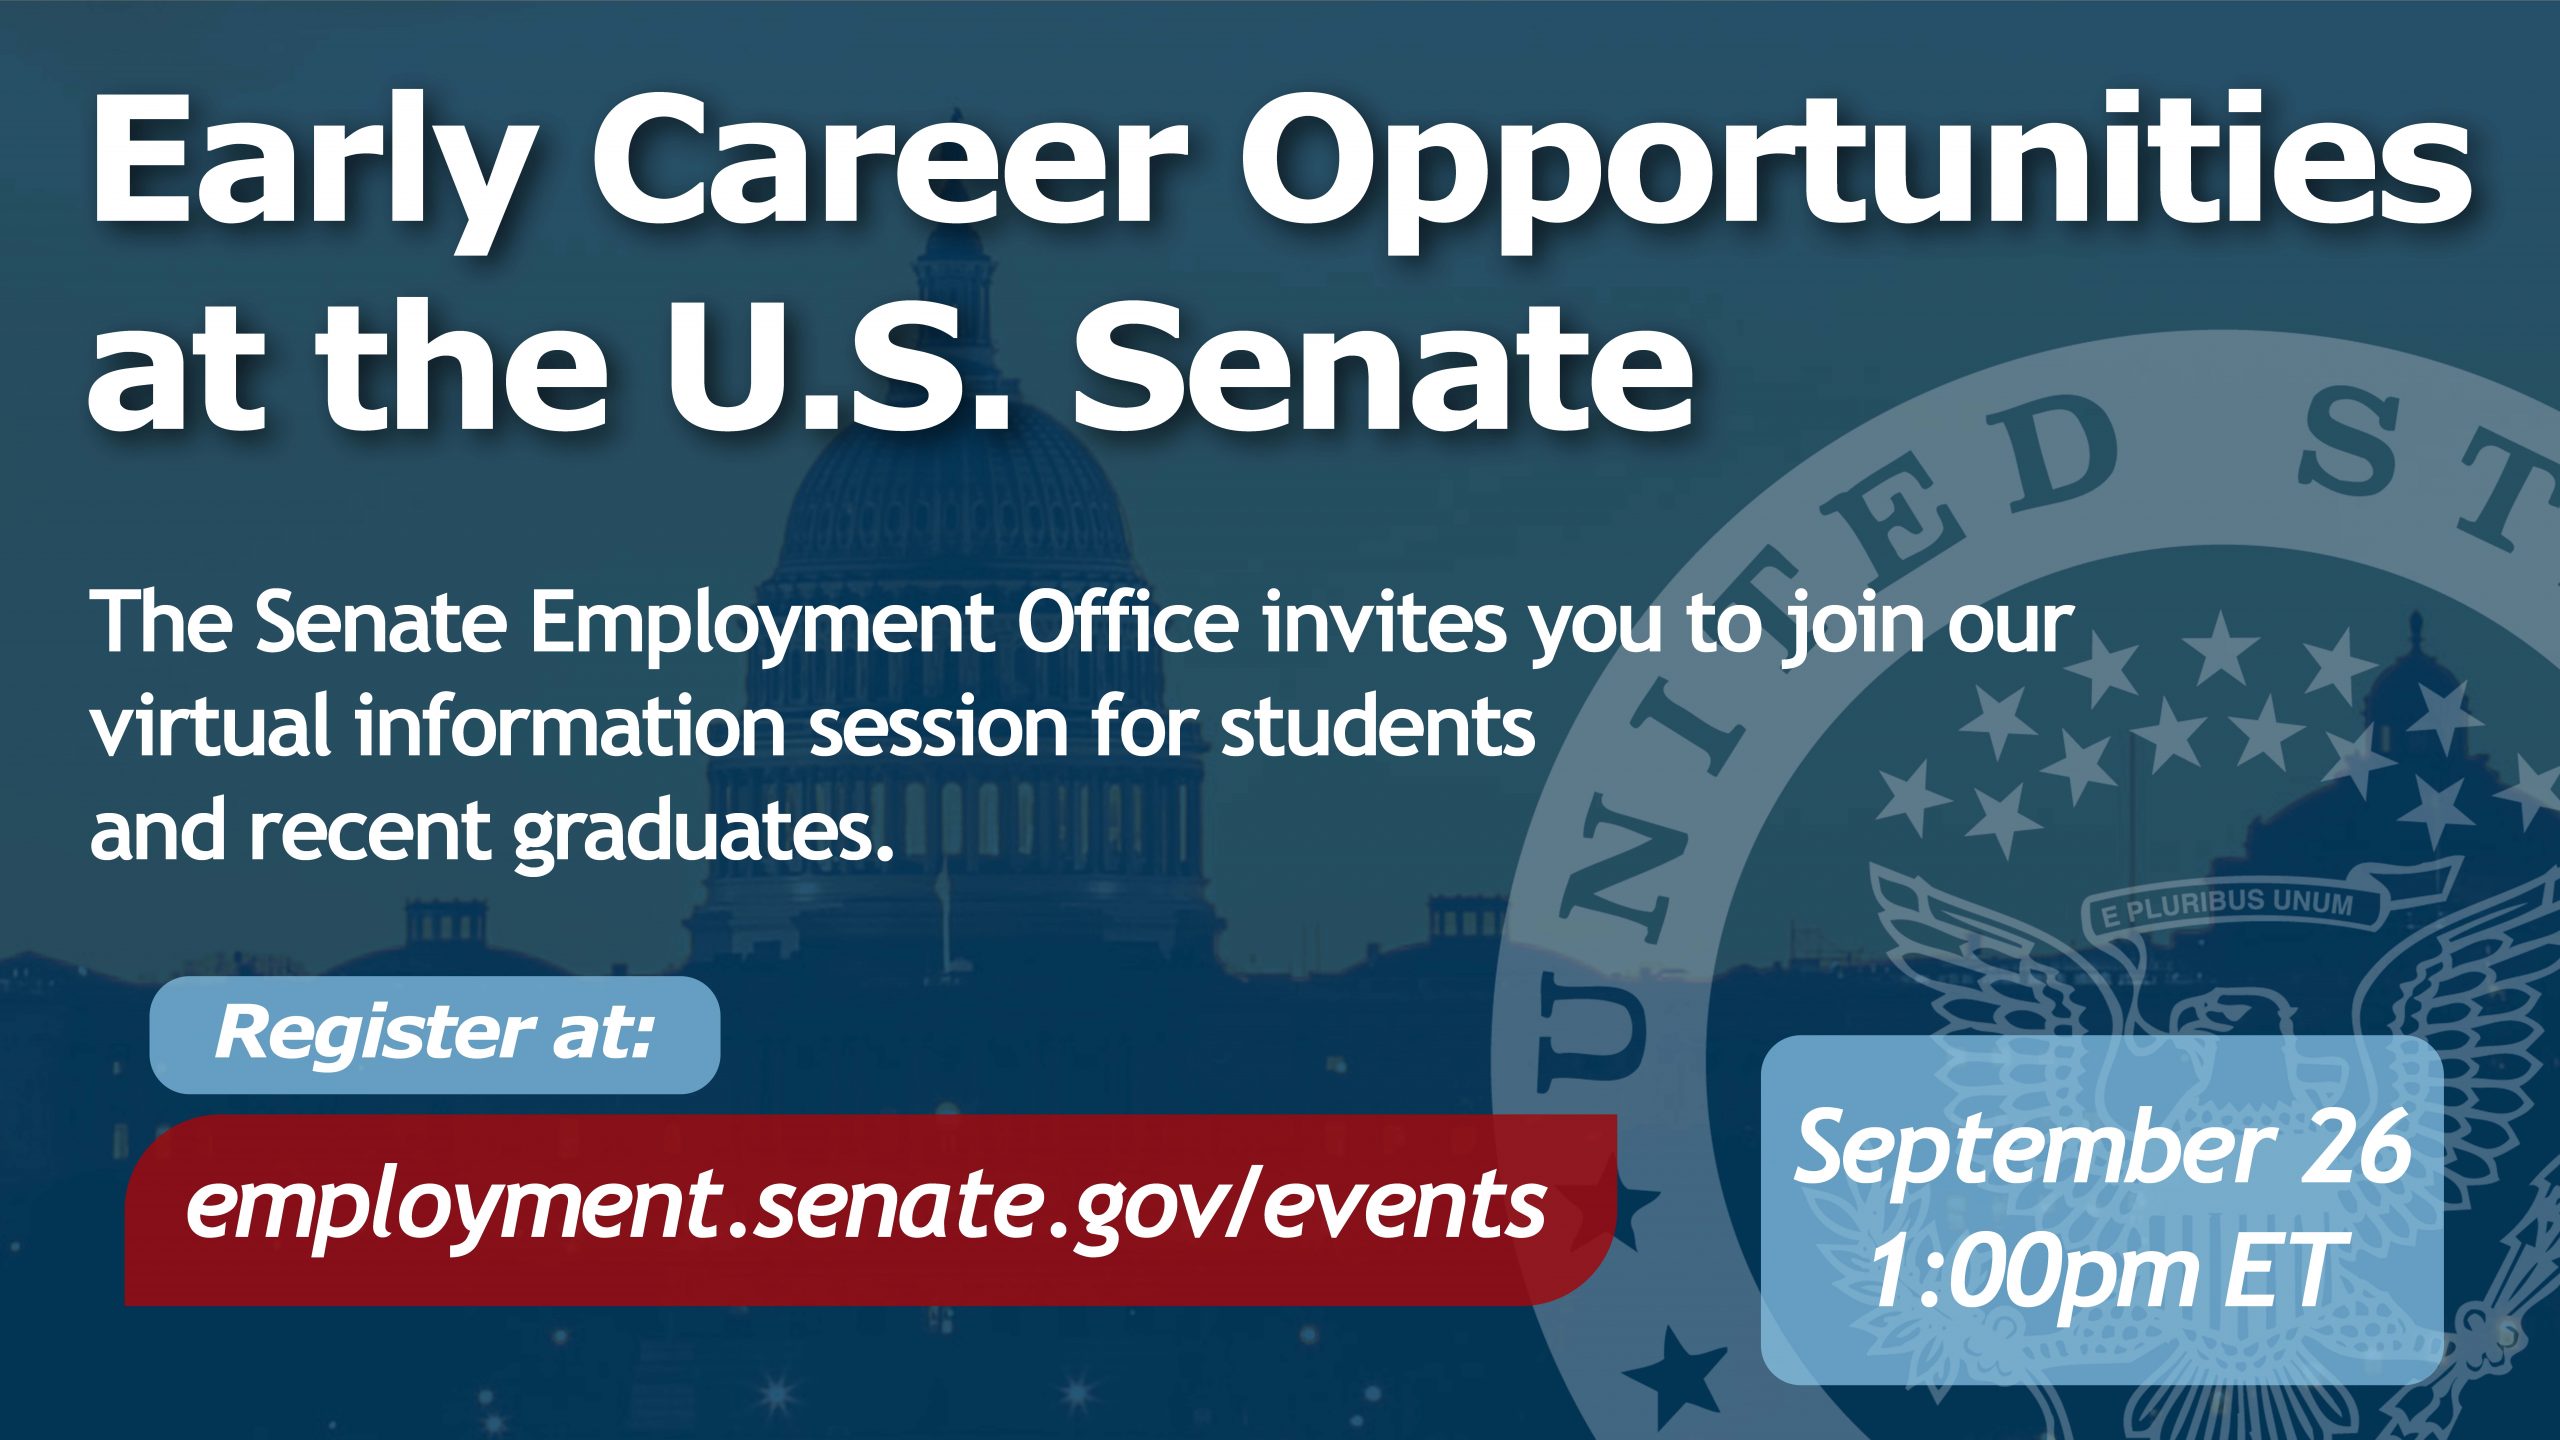 Early career opportunities at the U.S. Senate webinar promotional image.